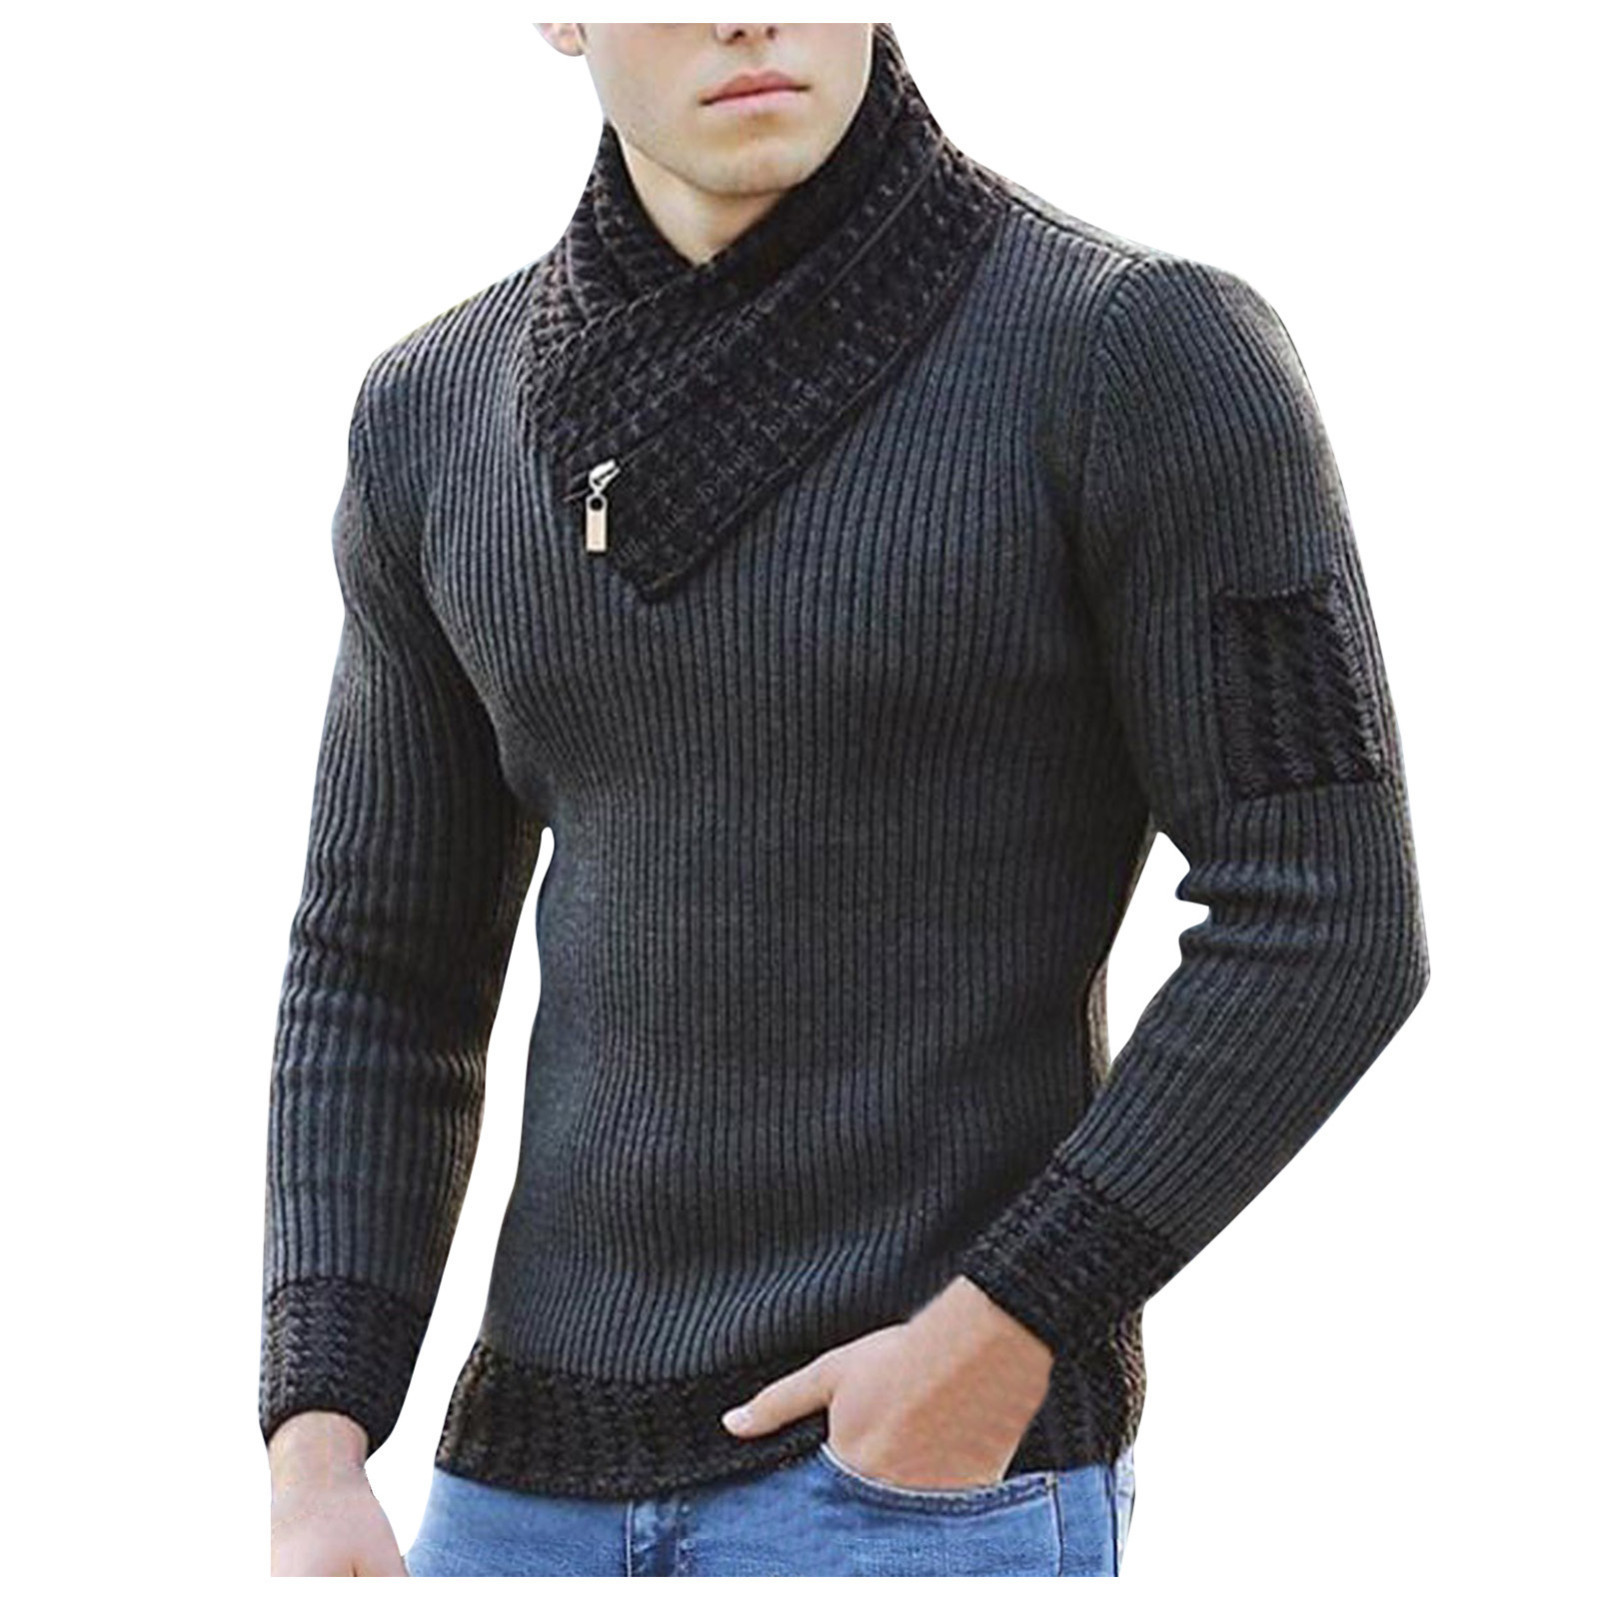 Hommes chandails haut solide pull écharpe pull taille col angleterre couleur pulls hommes moyen hiver manteau 220923